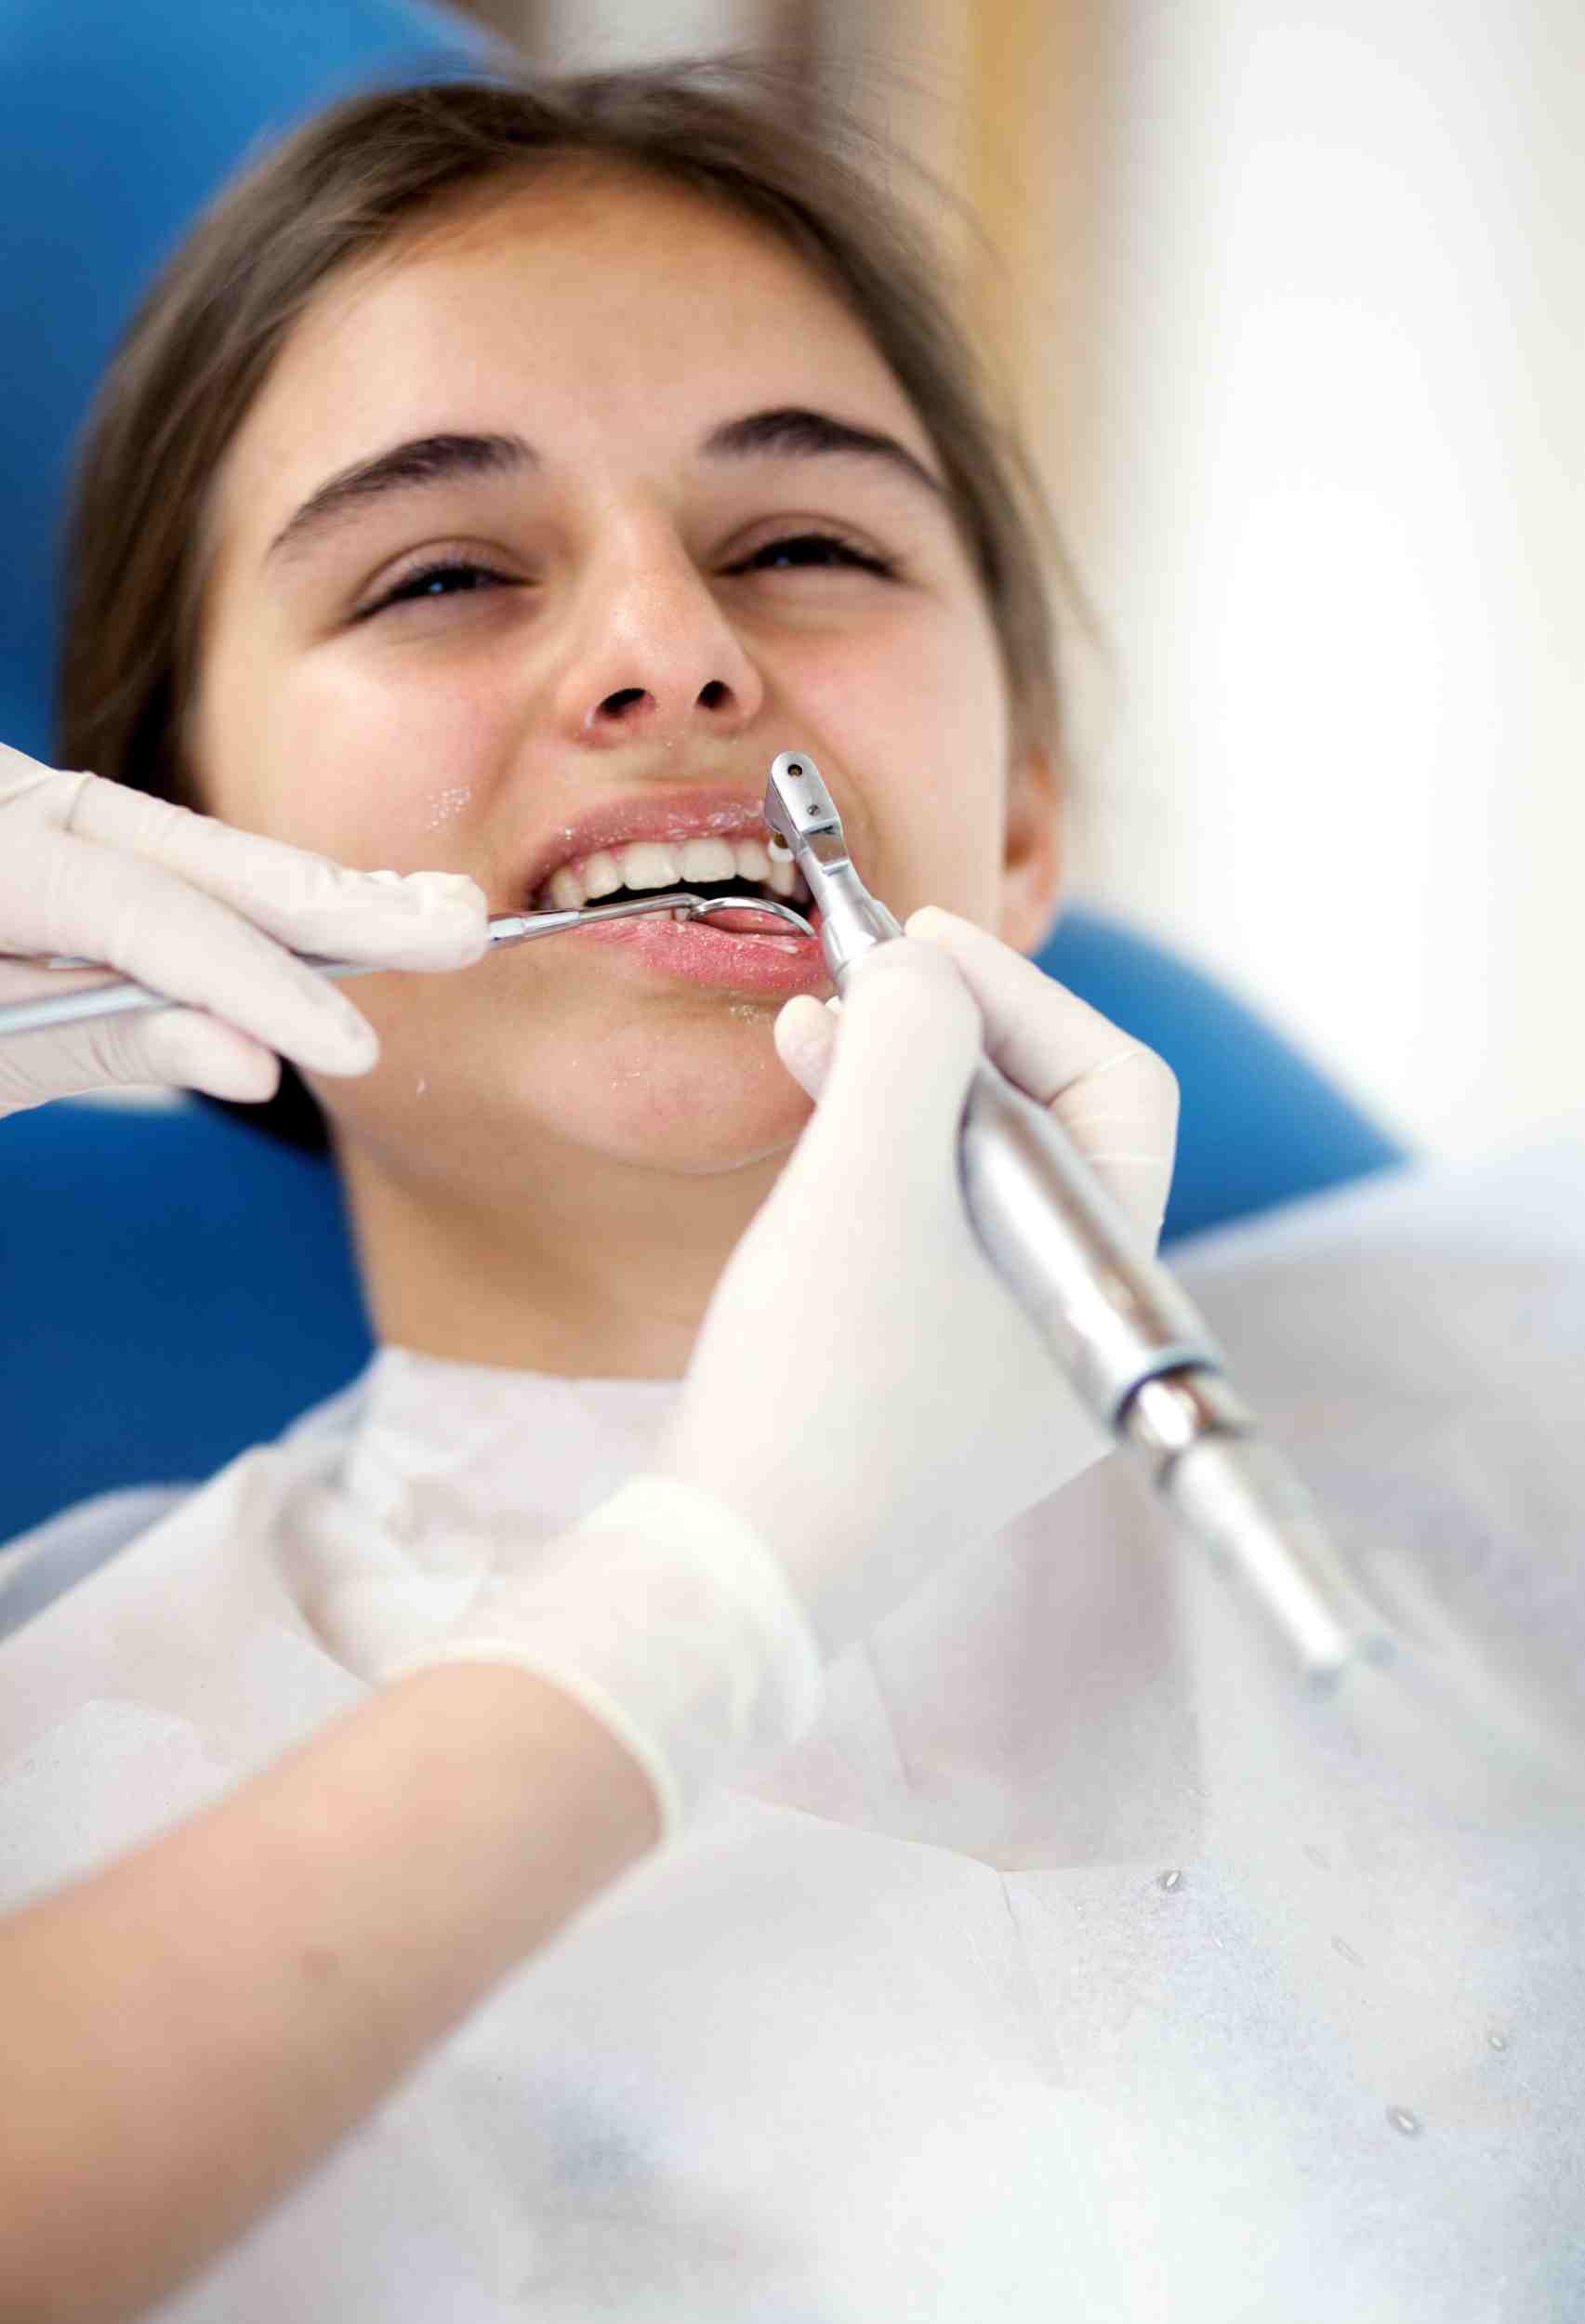 Managed Dental Care Plans An Essential Guide for Individuals and Families